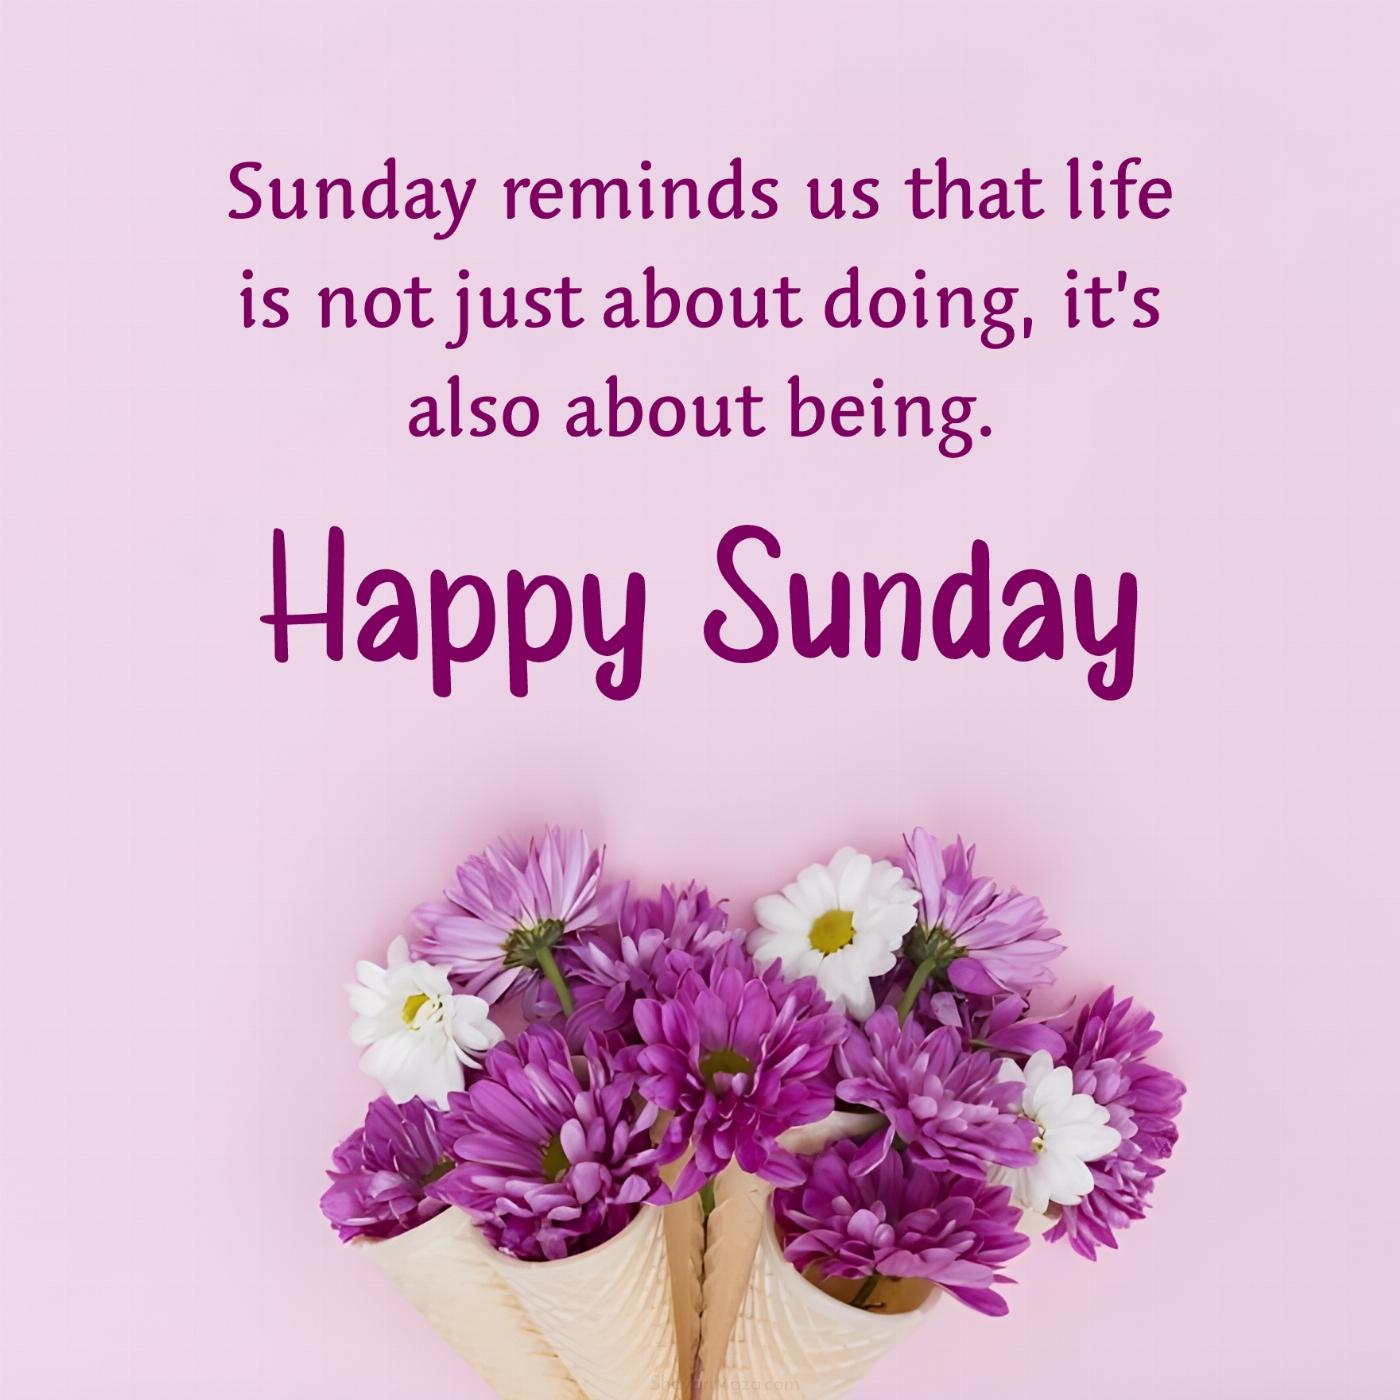 Sunday reminds us that life is not just about doing